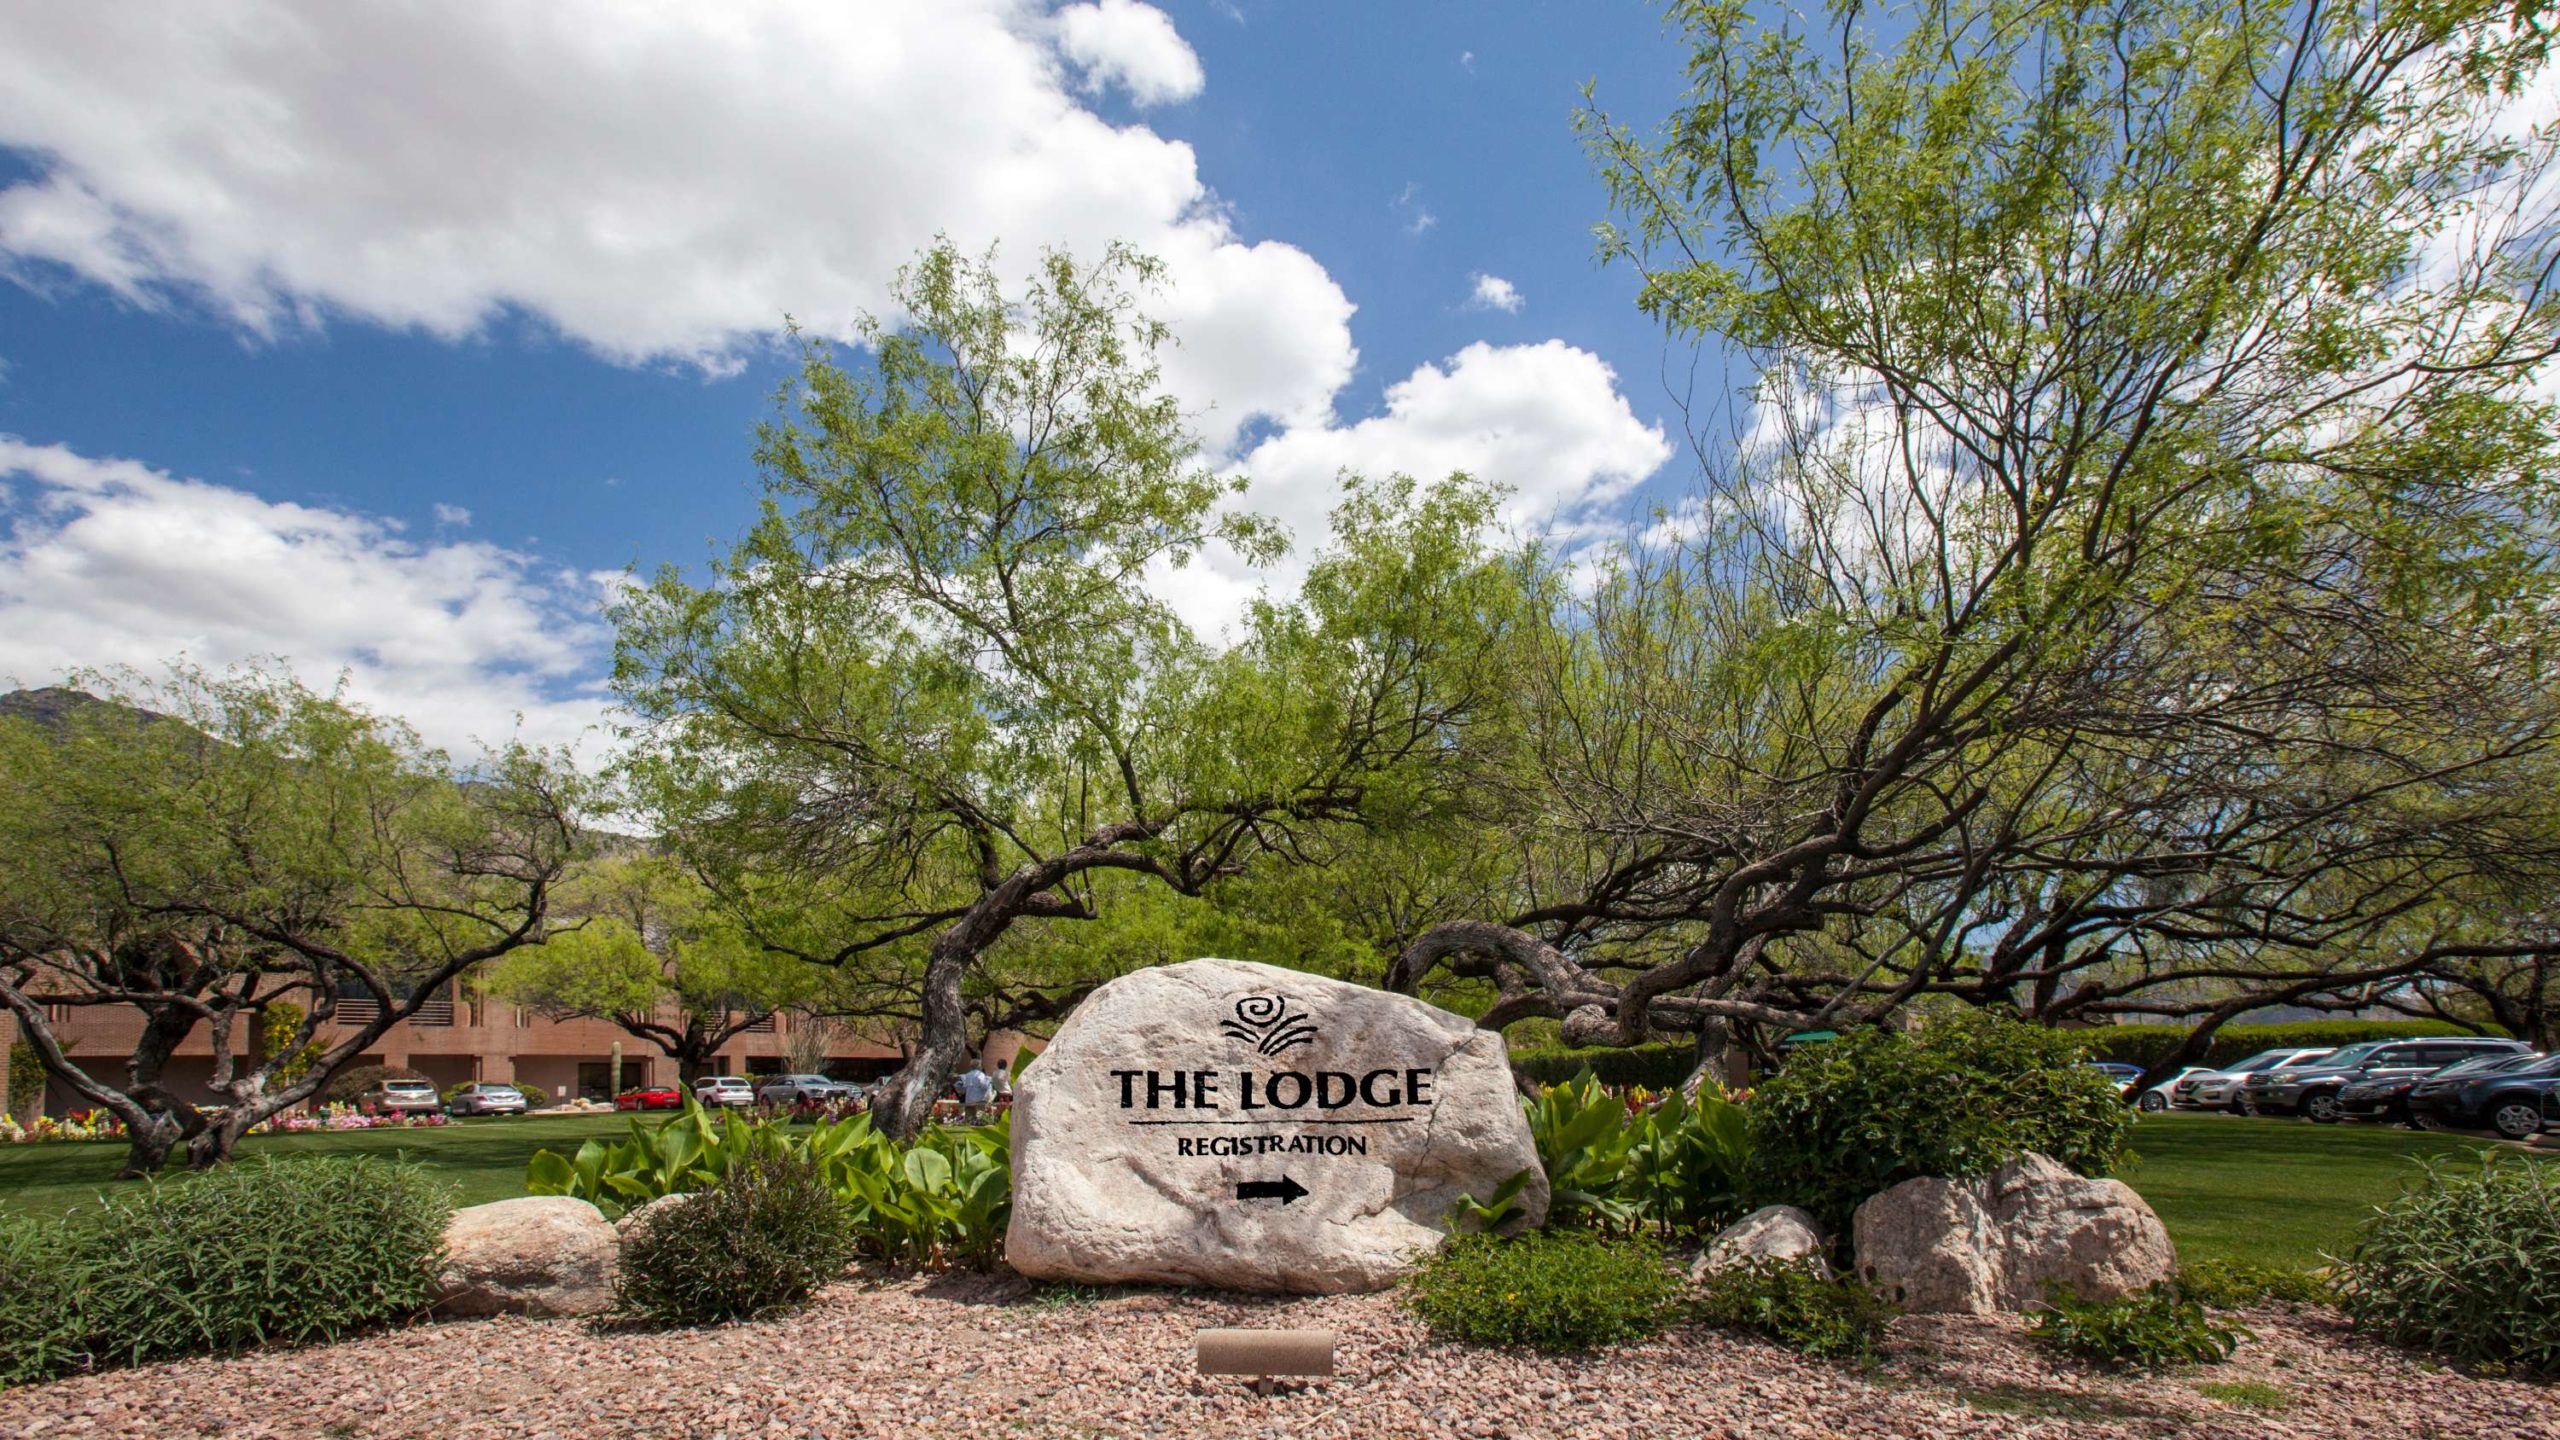 The Lodge Rock Sign